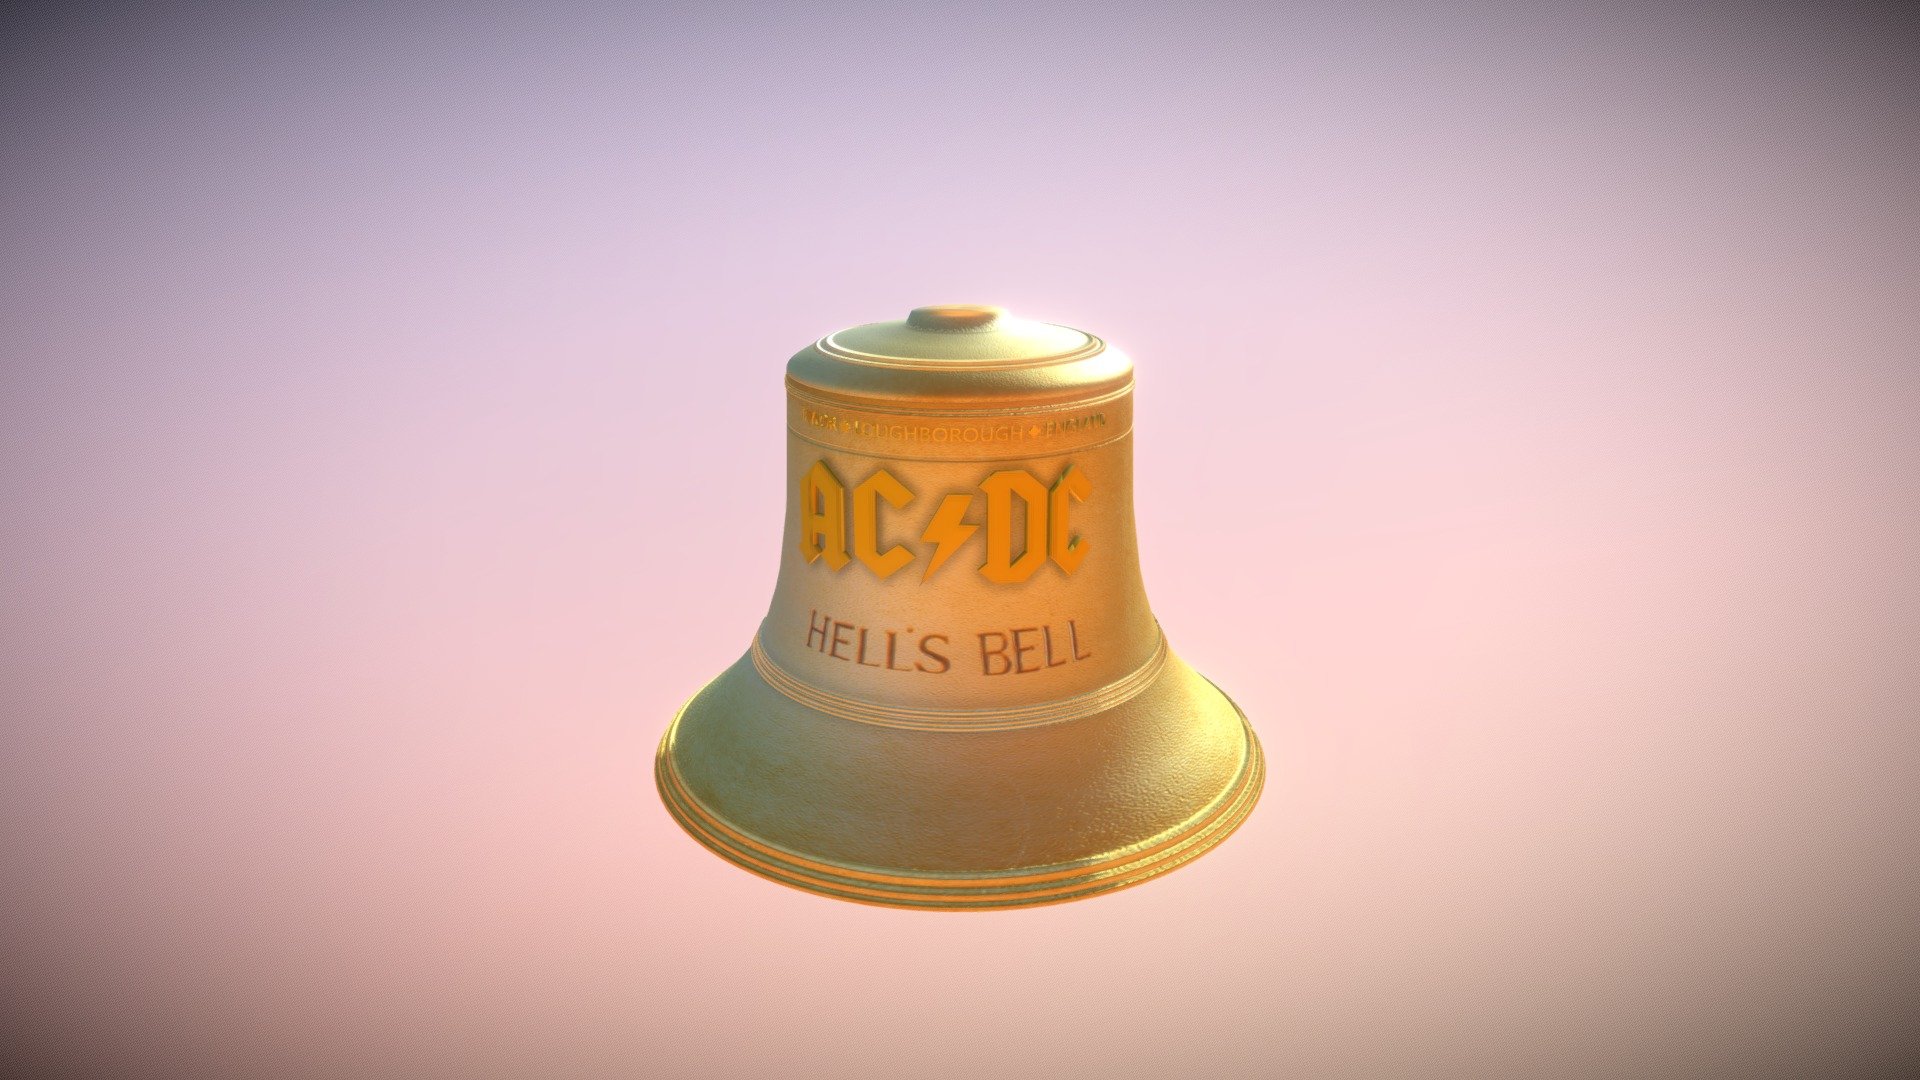 ACDC Hell's Bell